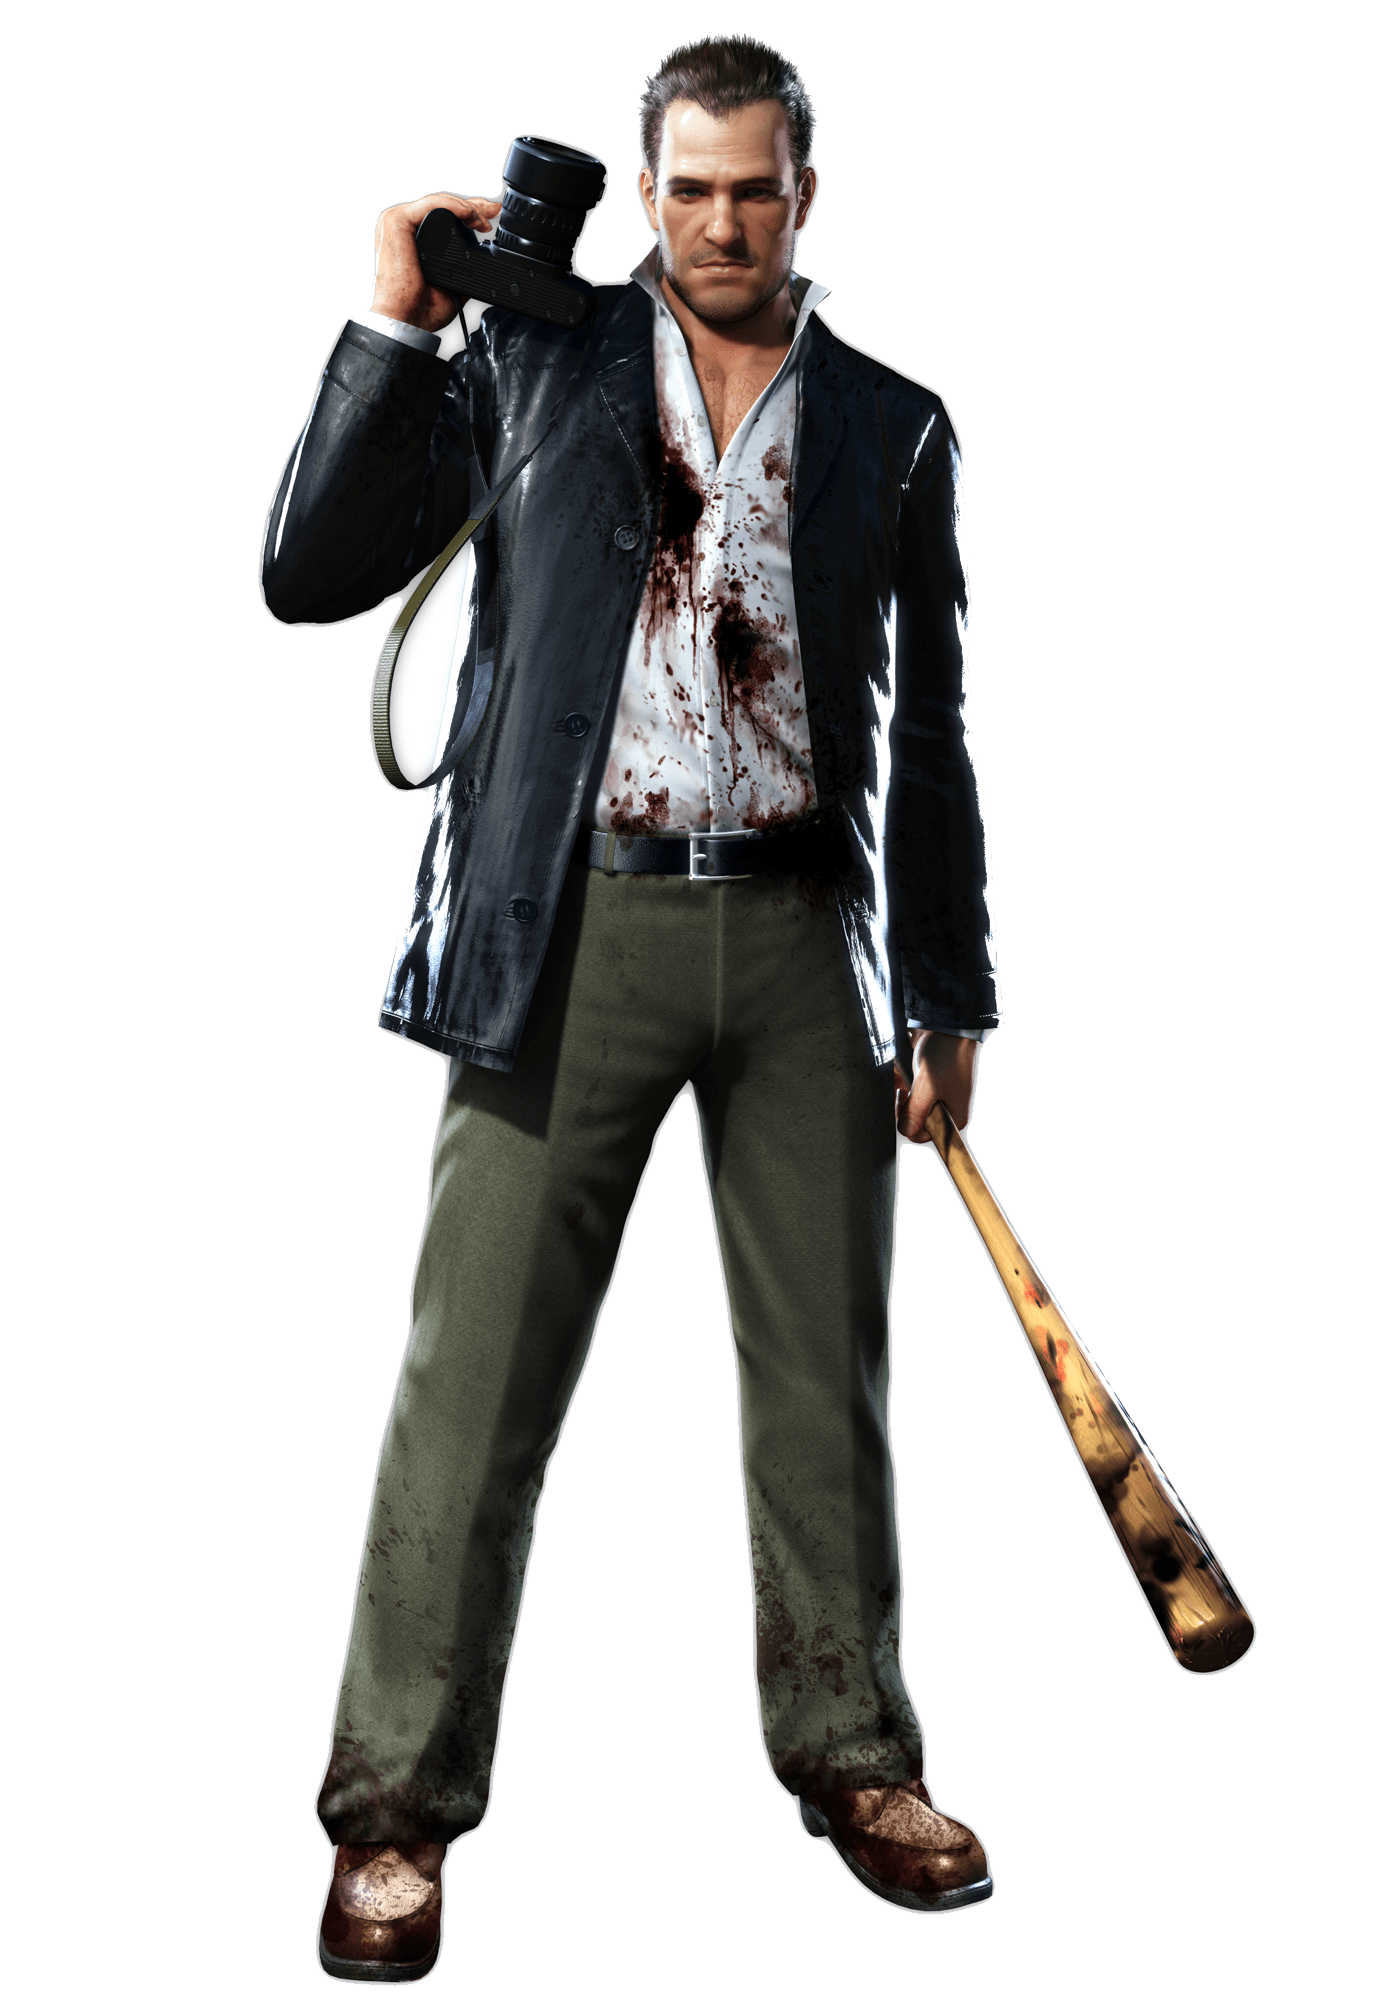 Dead Rising Png Image PNG Ima